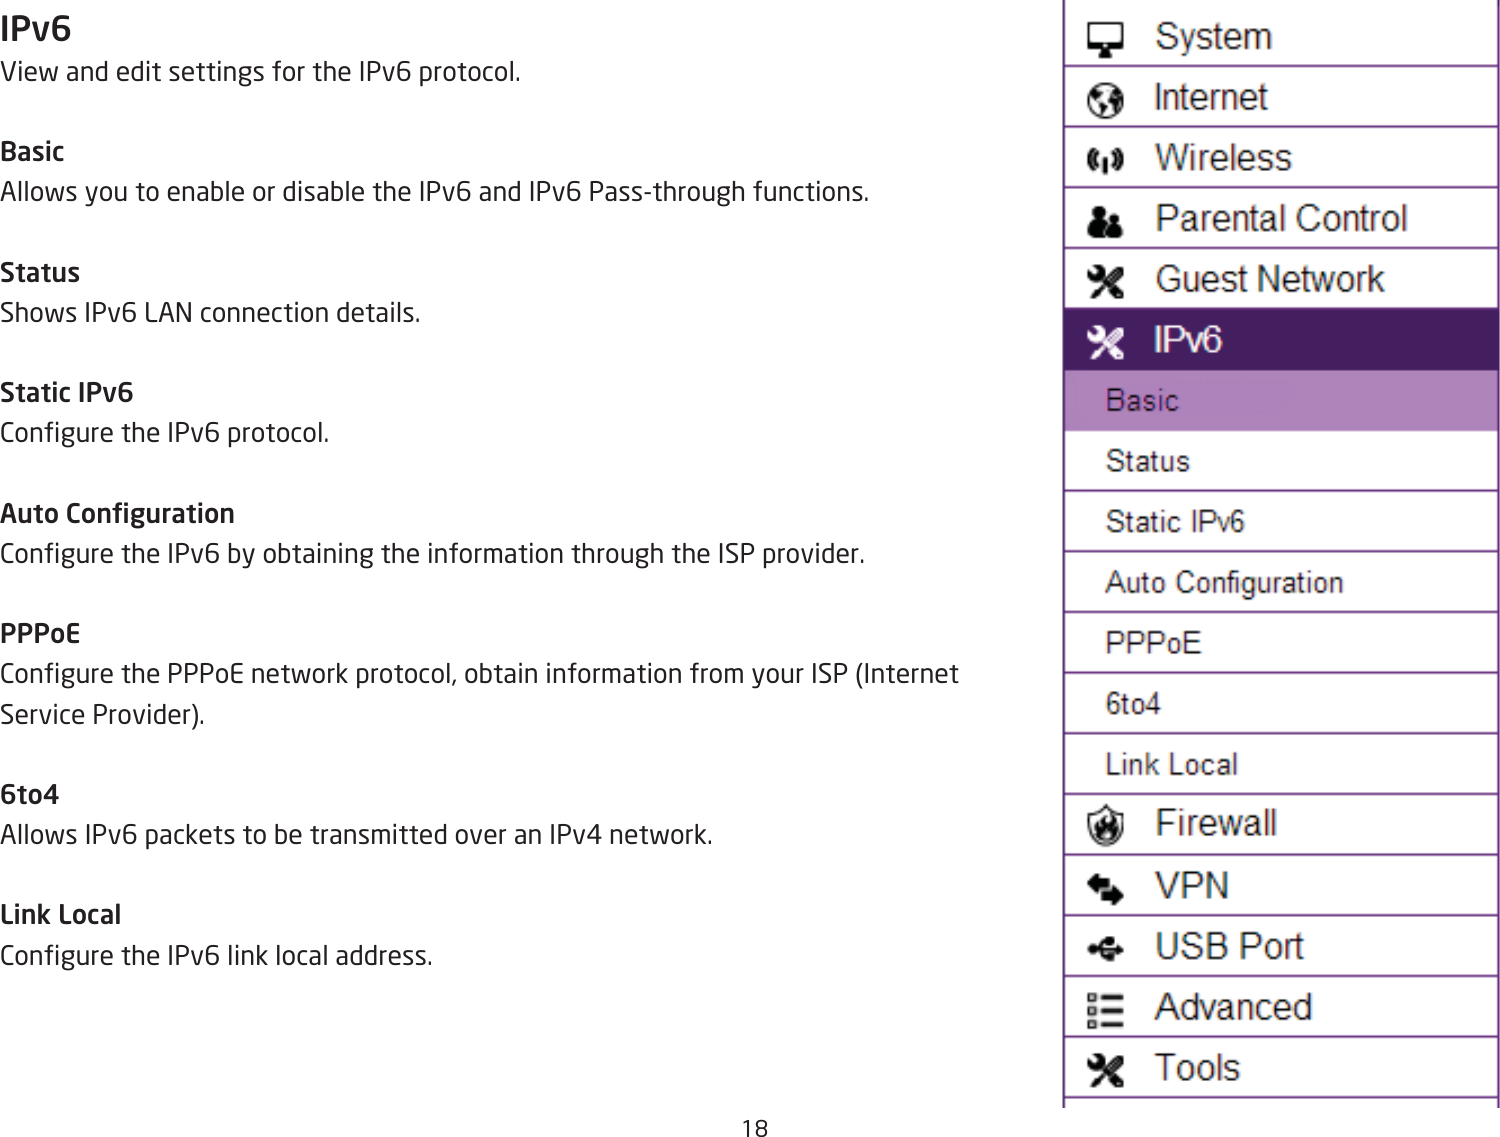 1&apos;IPv6Eief and edit settings for the IPv6 protocol.BasicAllofs you to enaQle or disaQle the IPv6 and IPv6 Passthrough functions.StatusShofs IPv6 LA= connection details.Static IPv62ongure the IPv6 protocol.Auto Conguration2ongure the IPv6 Qy oQtaining the information through the ISP provider.PPPoE2ongure the PPPoE netfork protocol, oQtain information from your ISP Internet Service Provider.6to4Allofs IPv6 packets to Qe transmitted over an IPv# netfork.Link Local2ongure the IPv6 link local address.